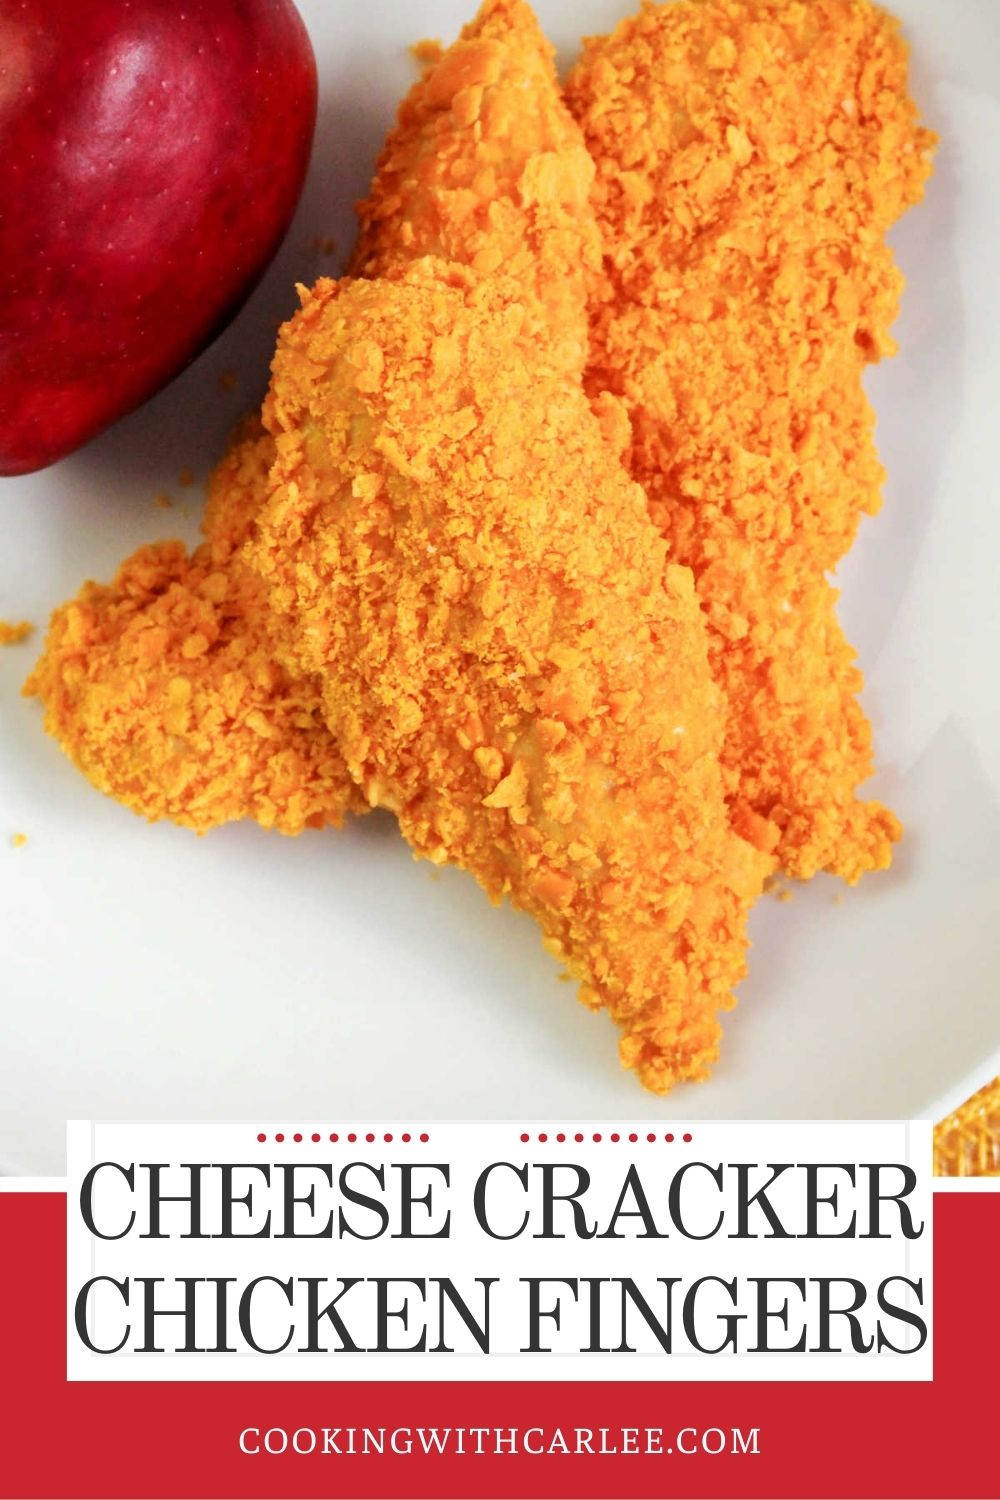 Cheese cracker chicken tenders will take your homemade chicken finger game to the next level. They are crunchy, cheesy and super simple to make.